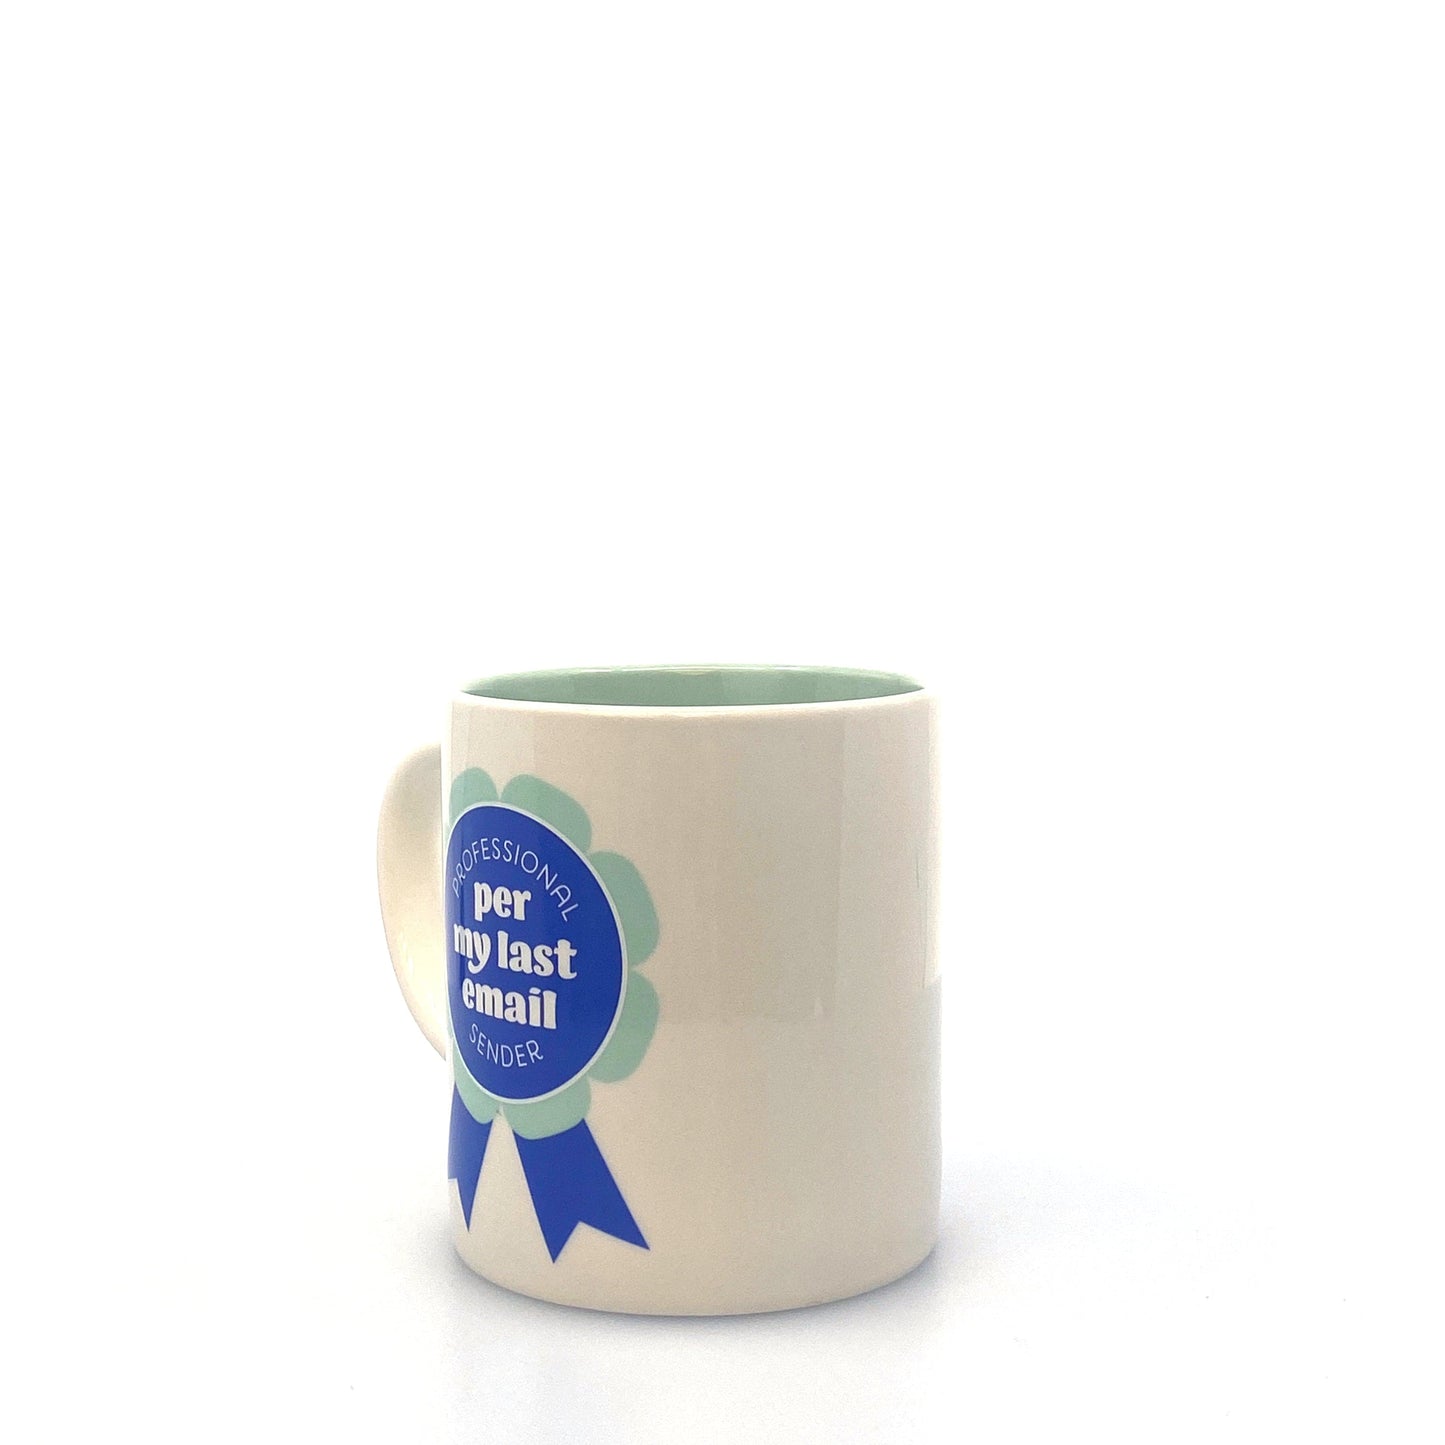 Professional “per my last email” Sender Coffee Cup 16 Oz